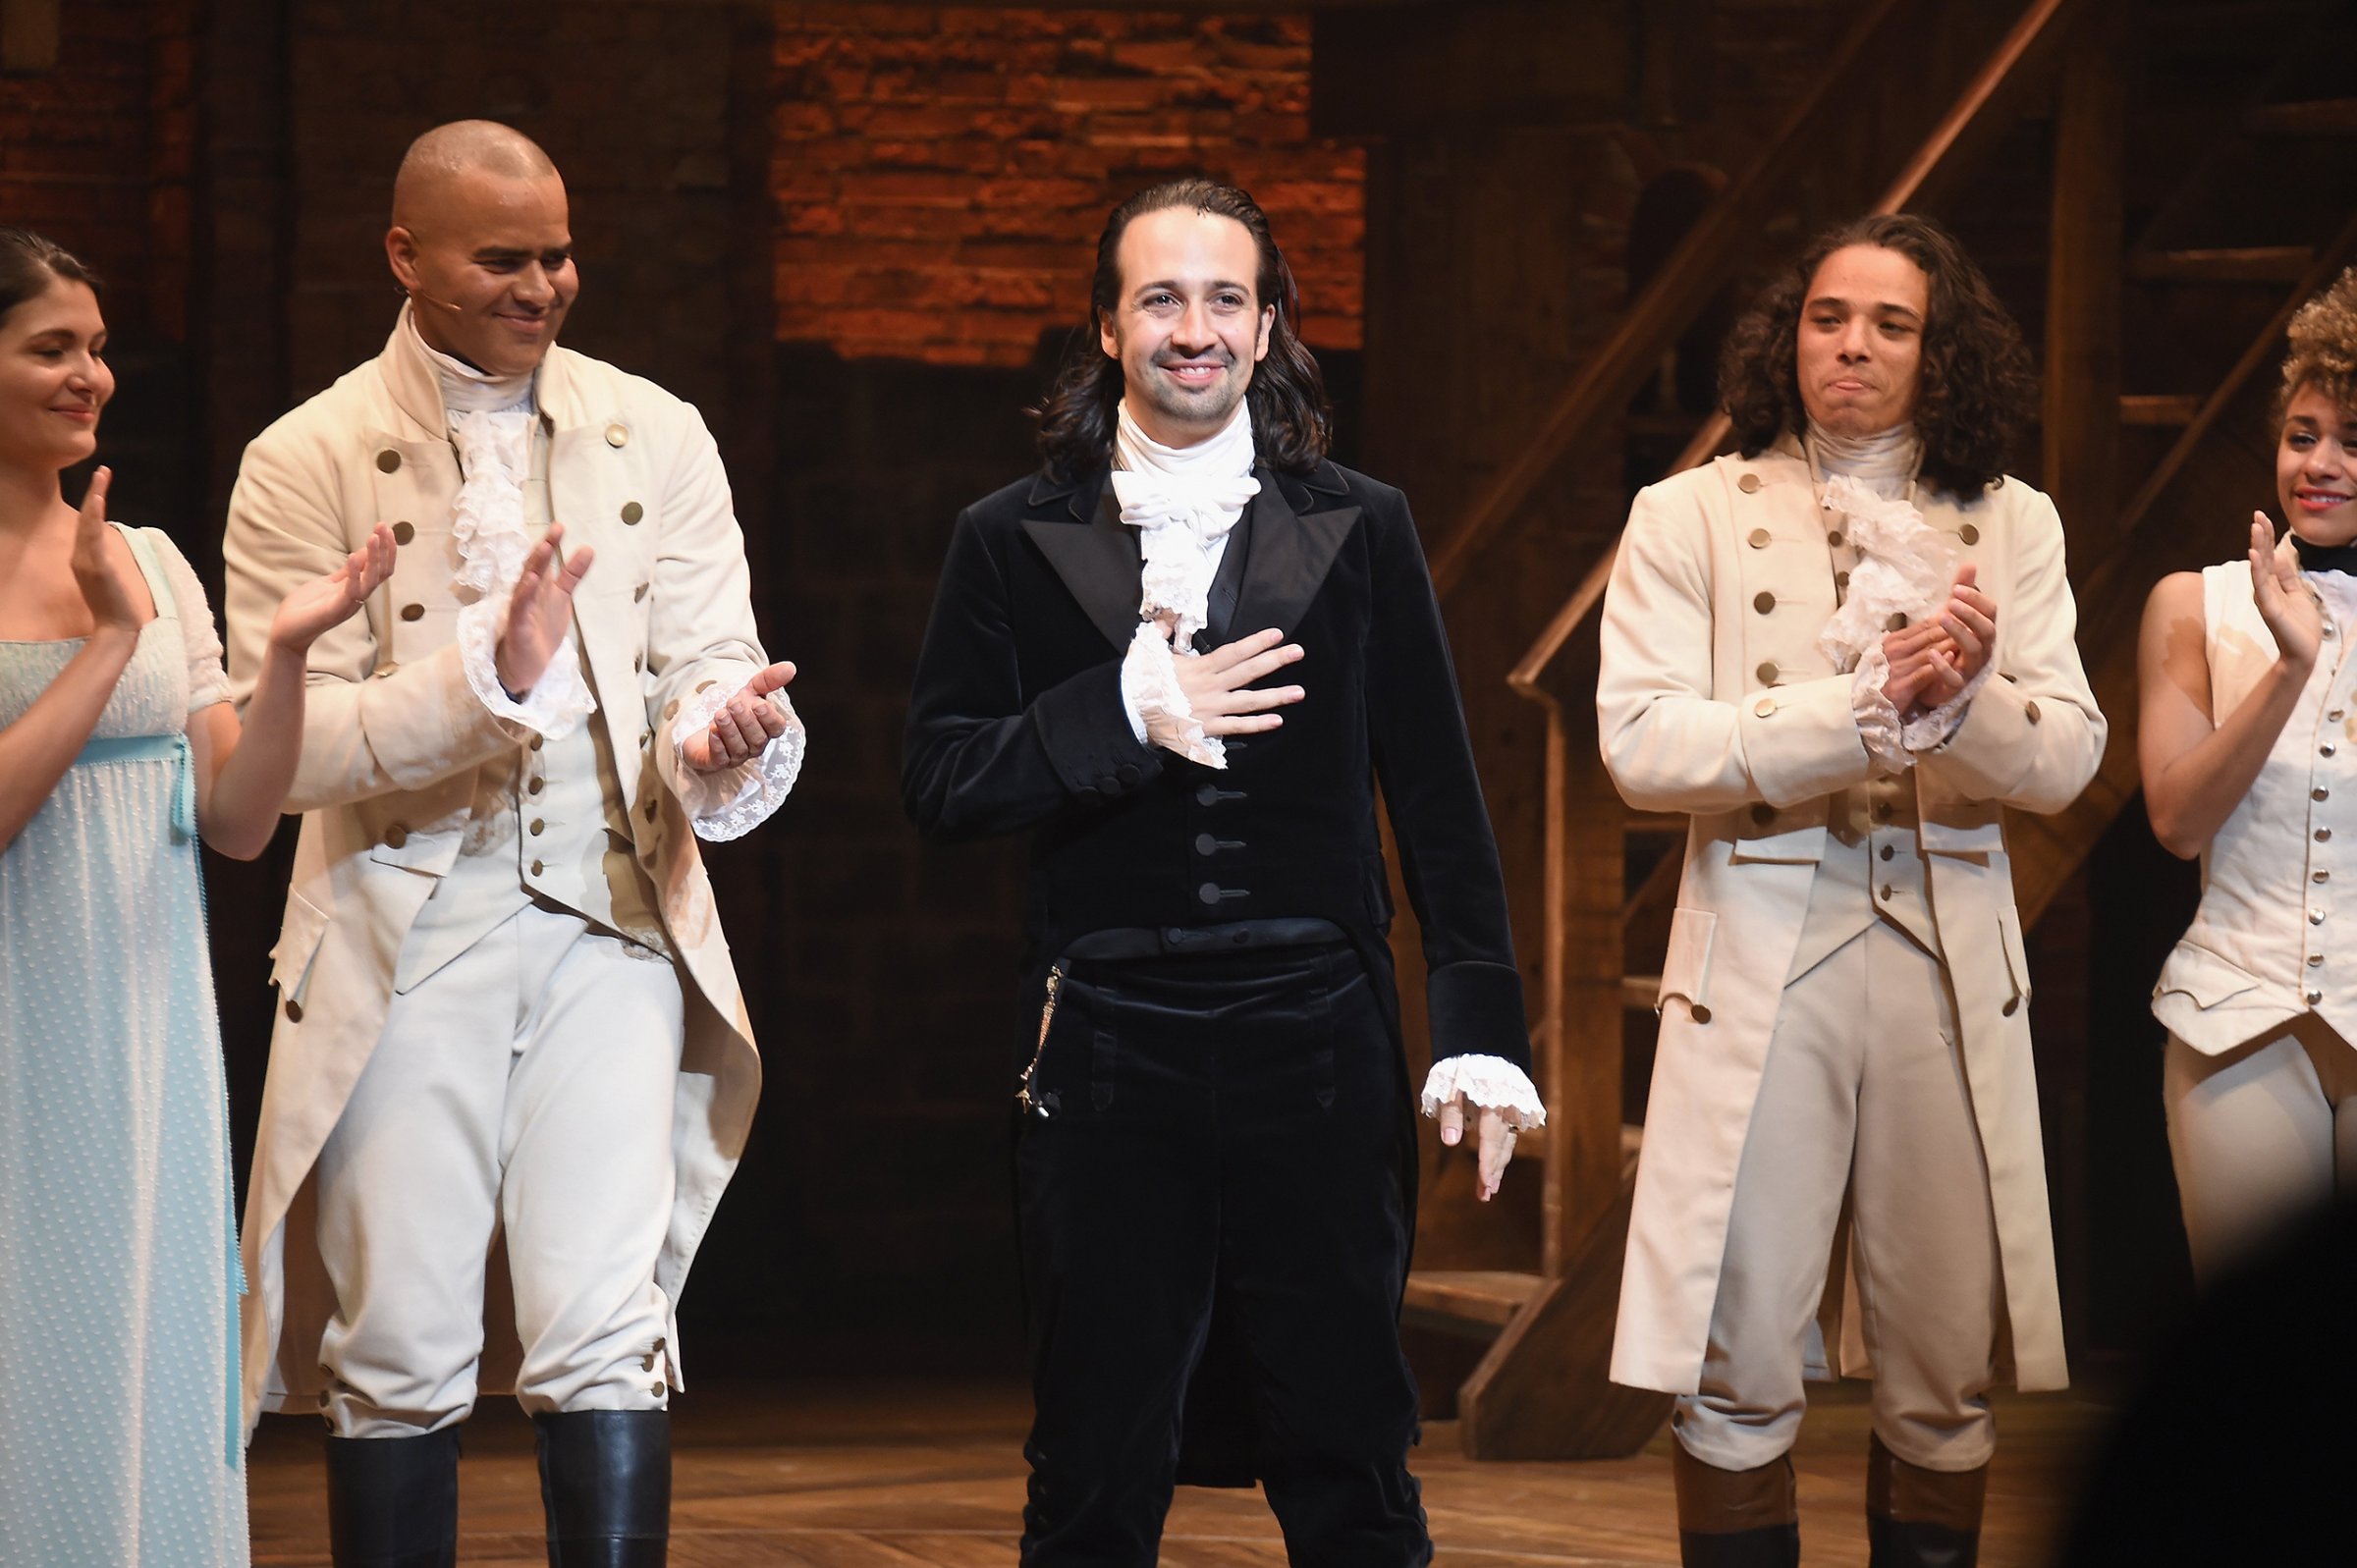 Lin-Manuel Miranda's final performance of "Hamilton" on Broadway at Richard Rodgers Theatre in New York City on July 9, 2016.